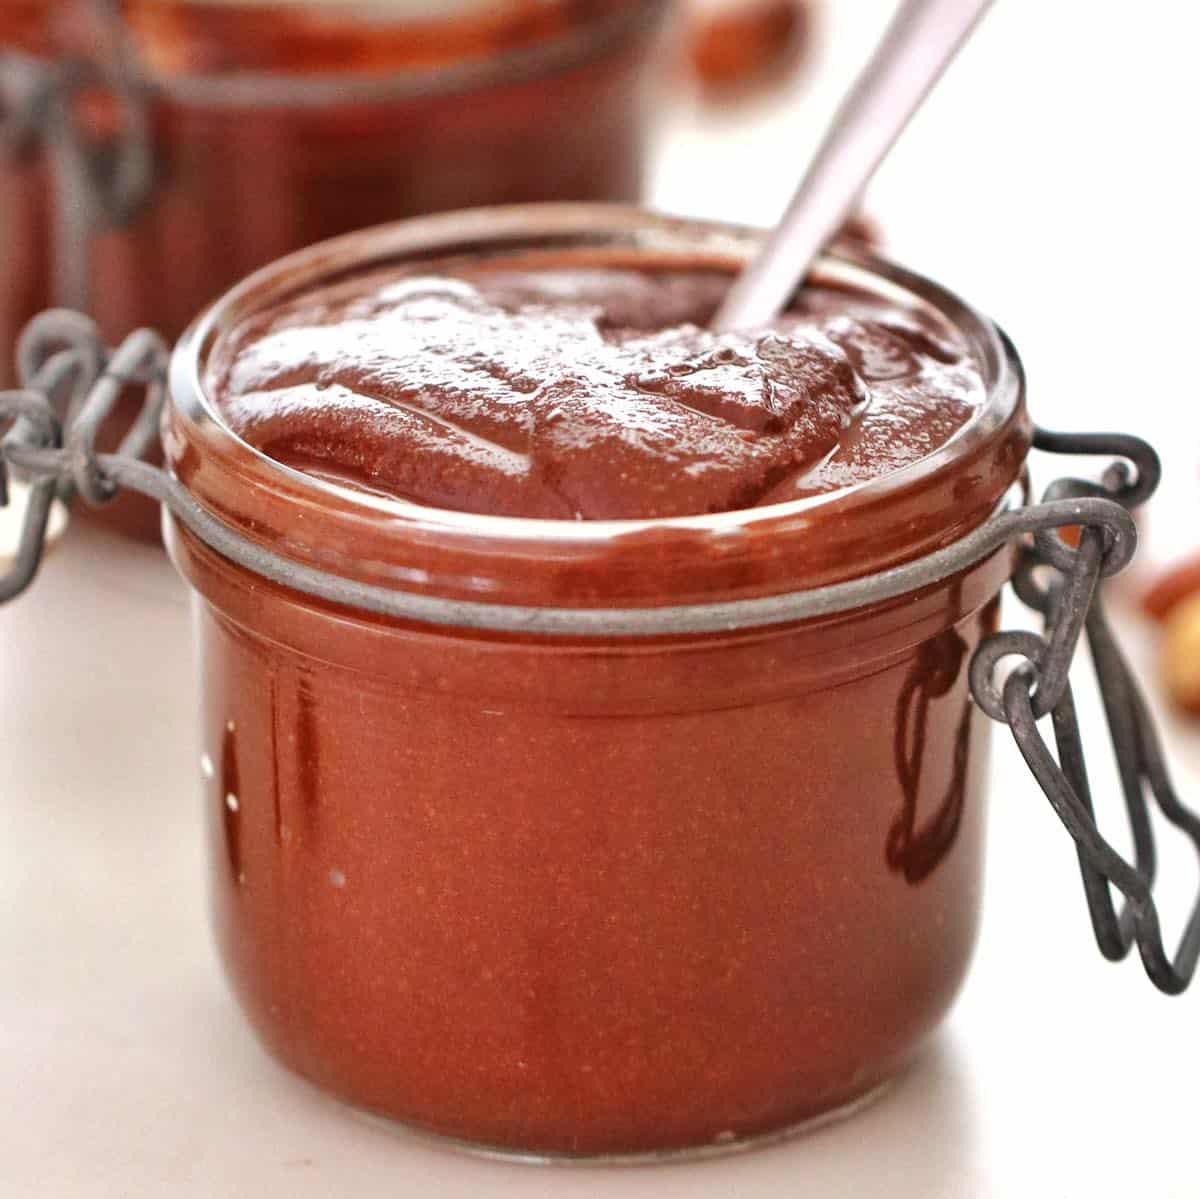 Thermomix nutella in a jar